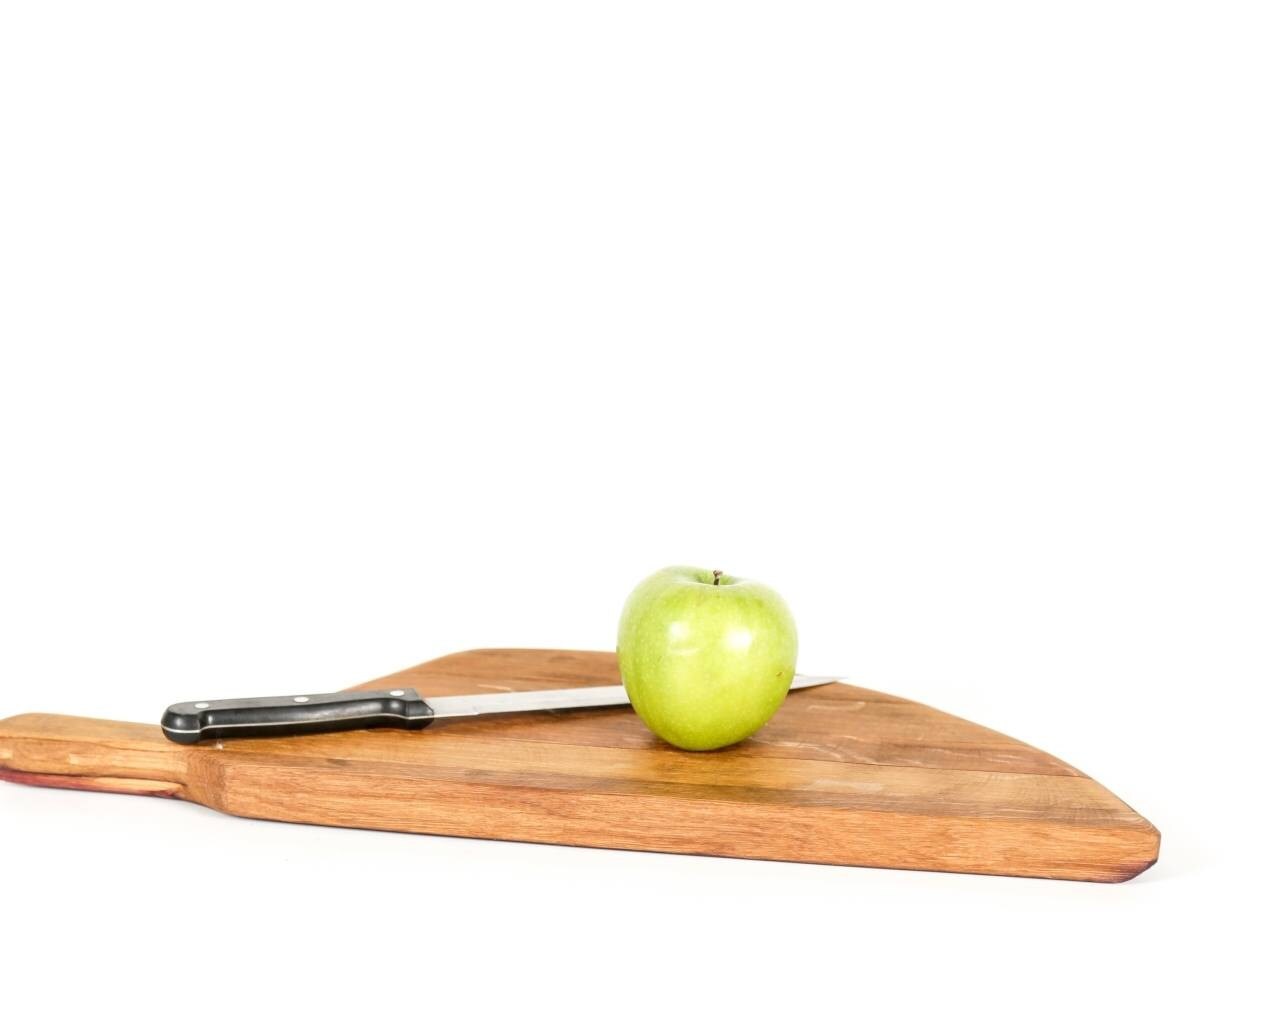 Wine Barrel Head Charcuterie or Cutting Board - Safia - Made from CA wine barrels. 100% recycled